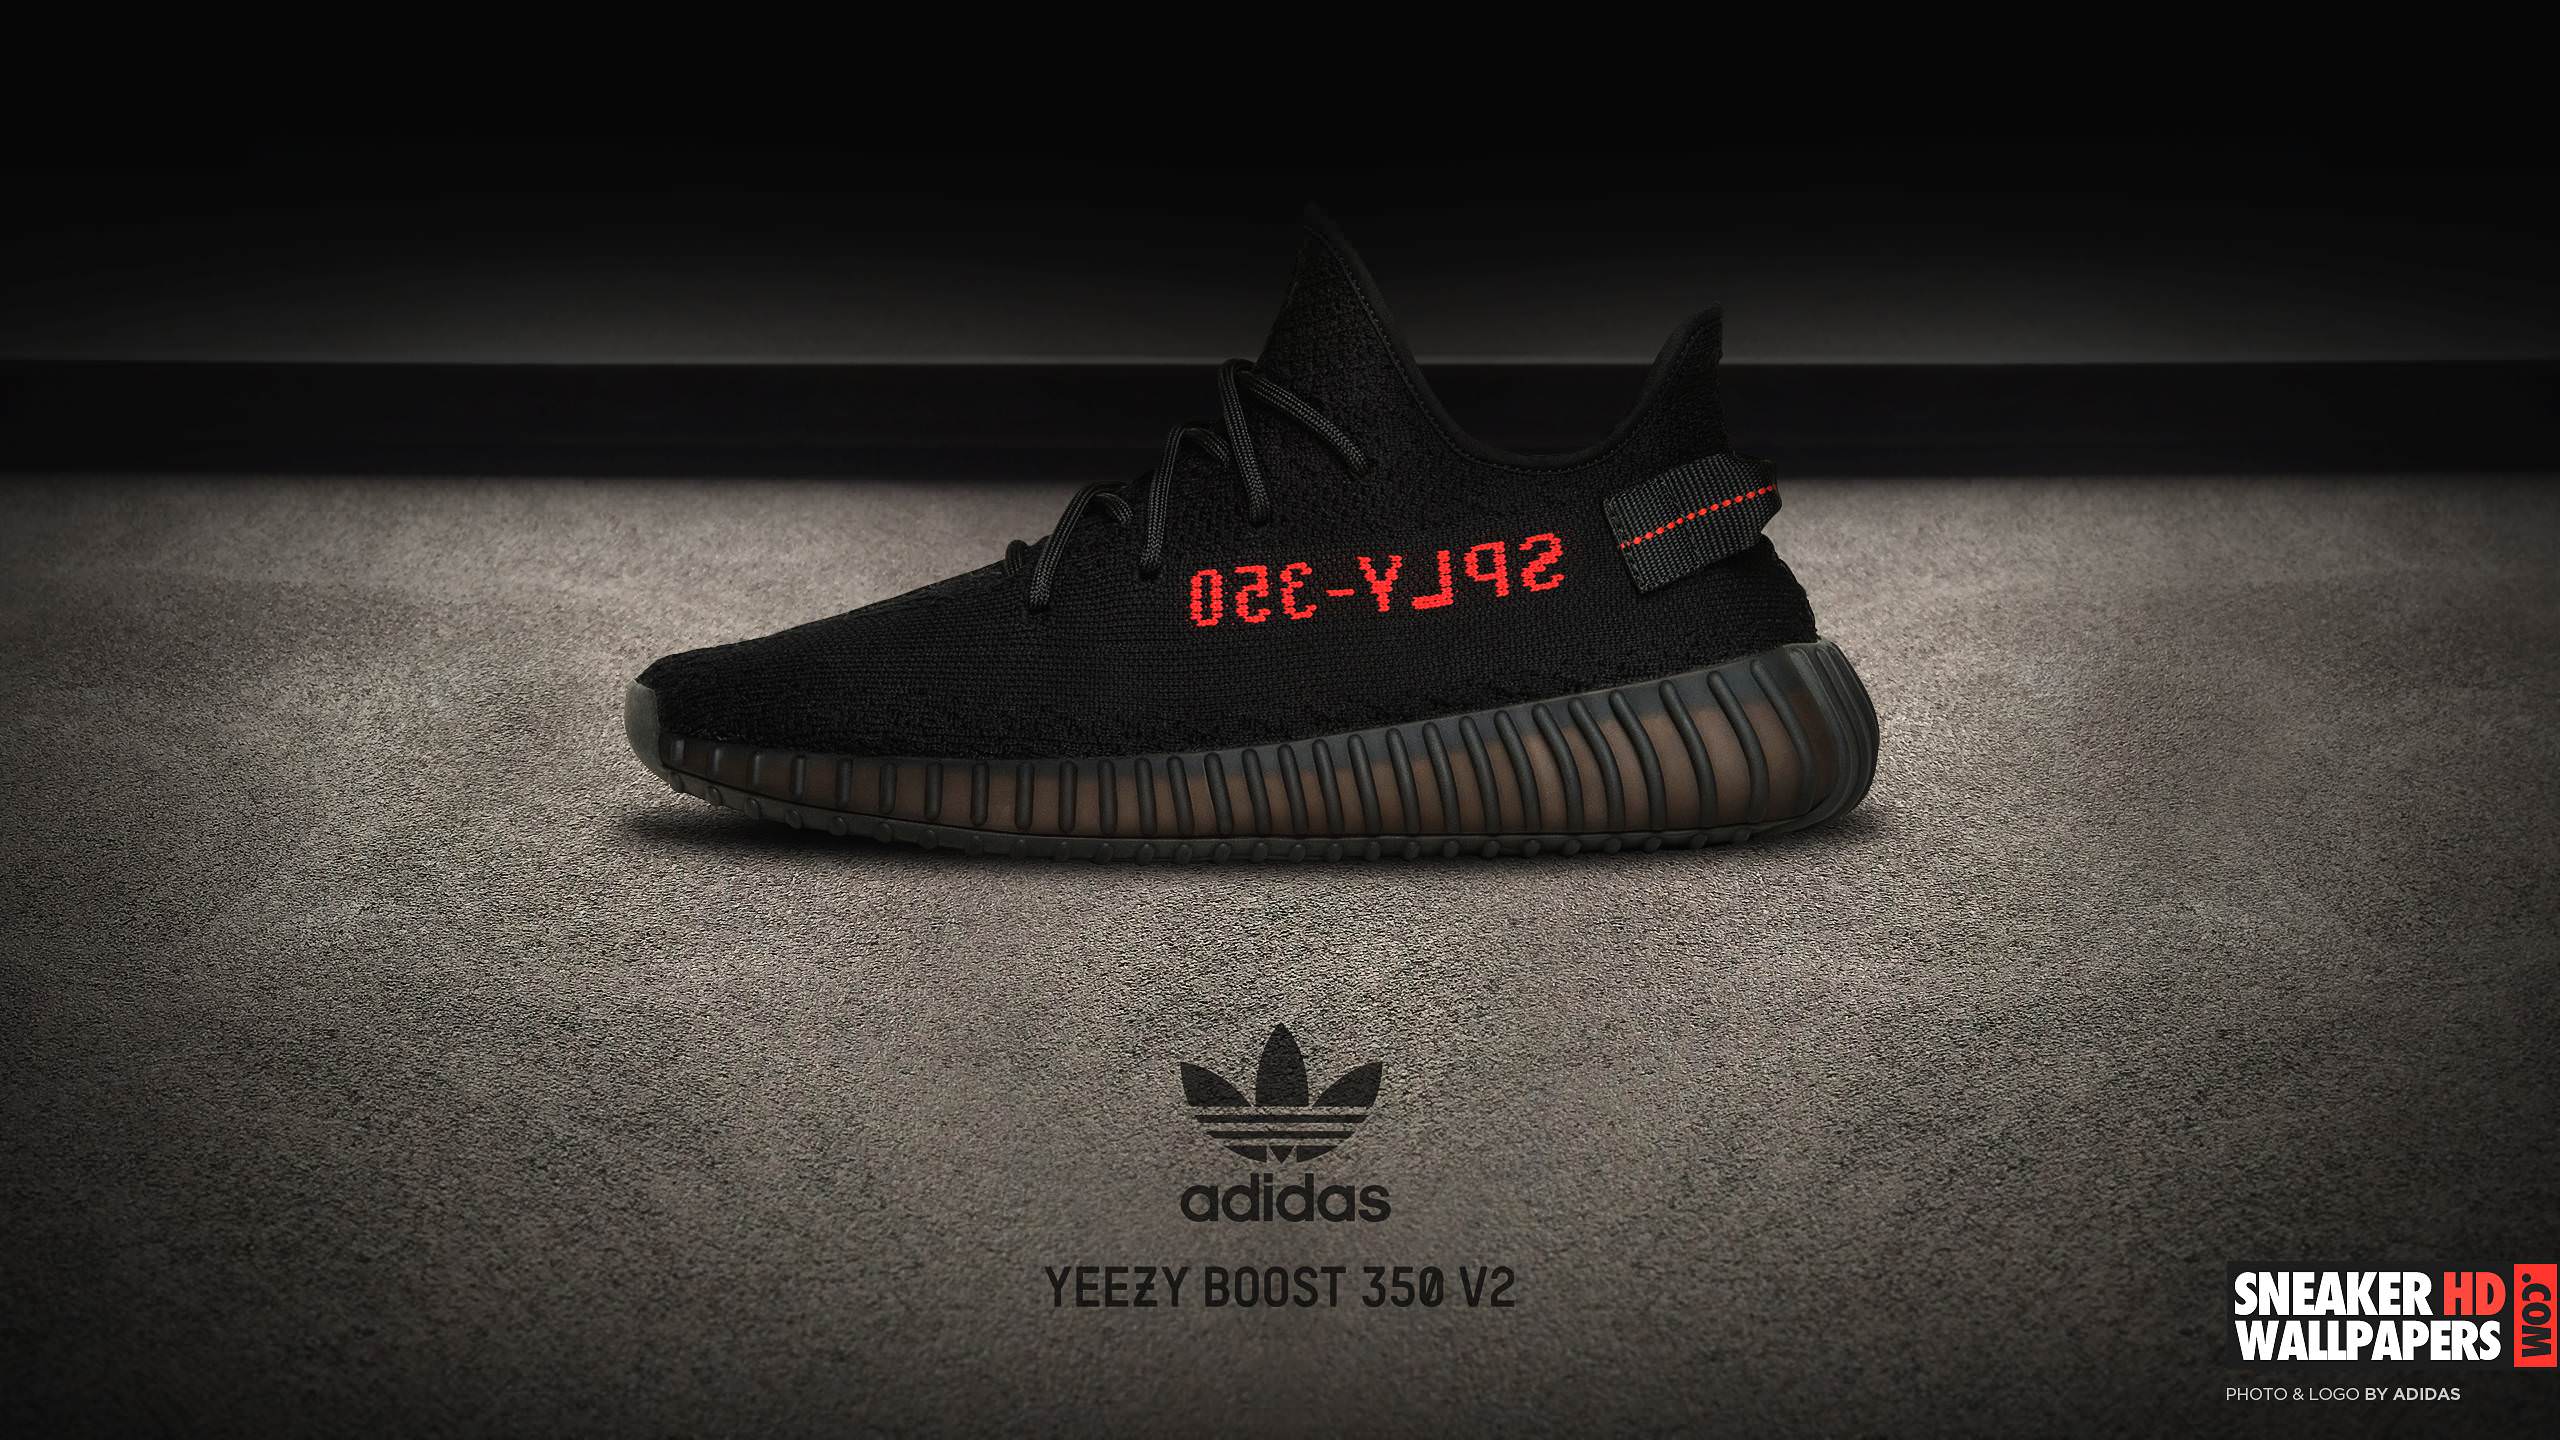 Adidas Yeezy Wallpapers - Top Free